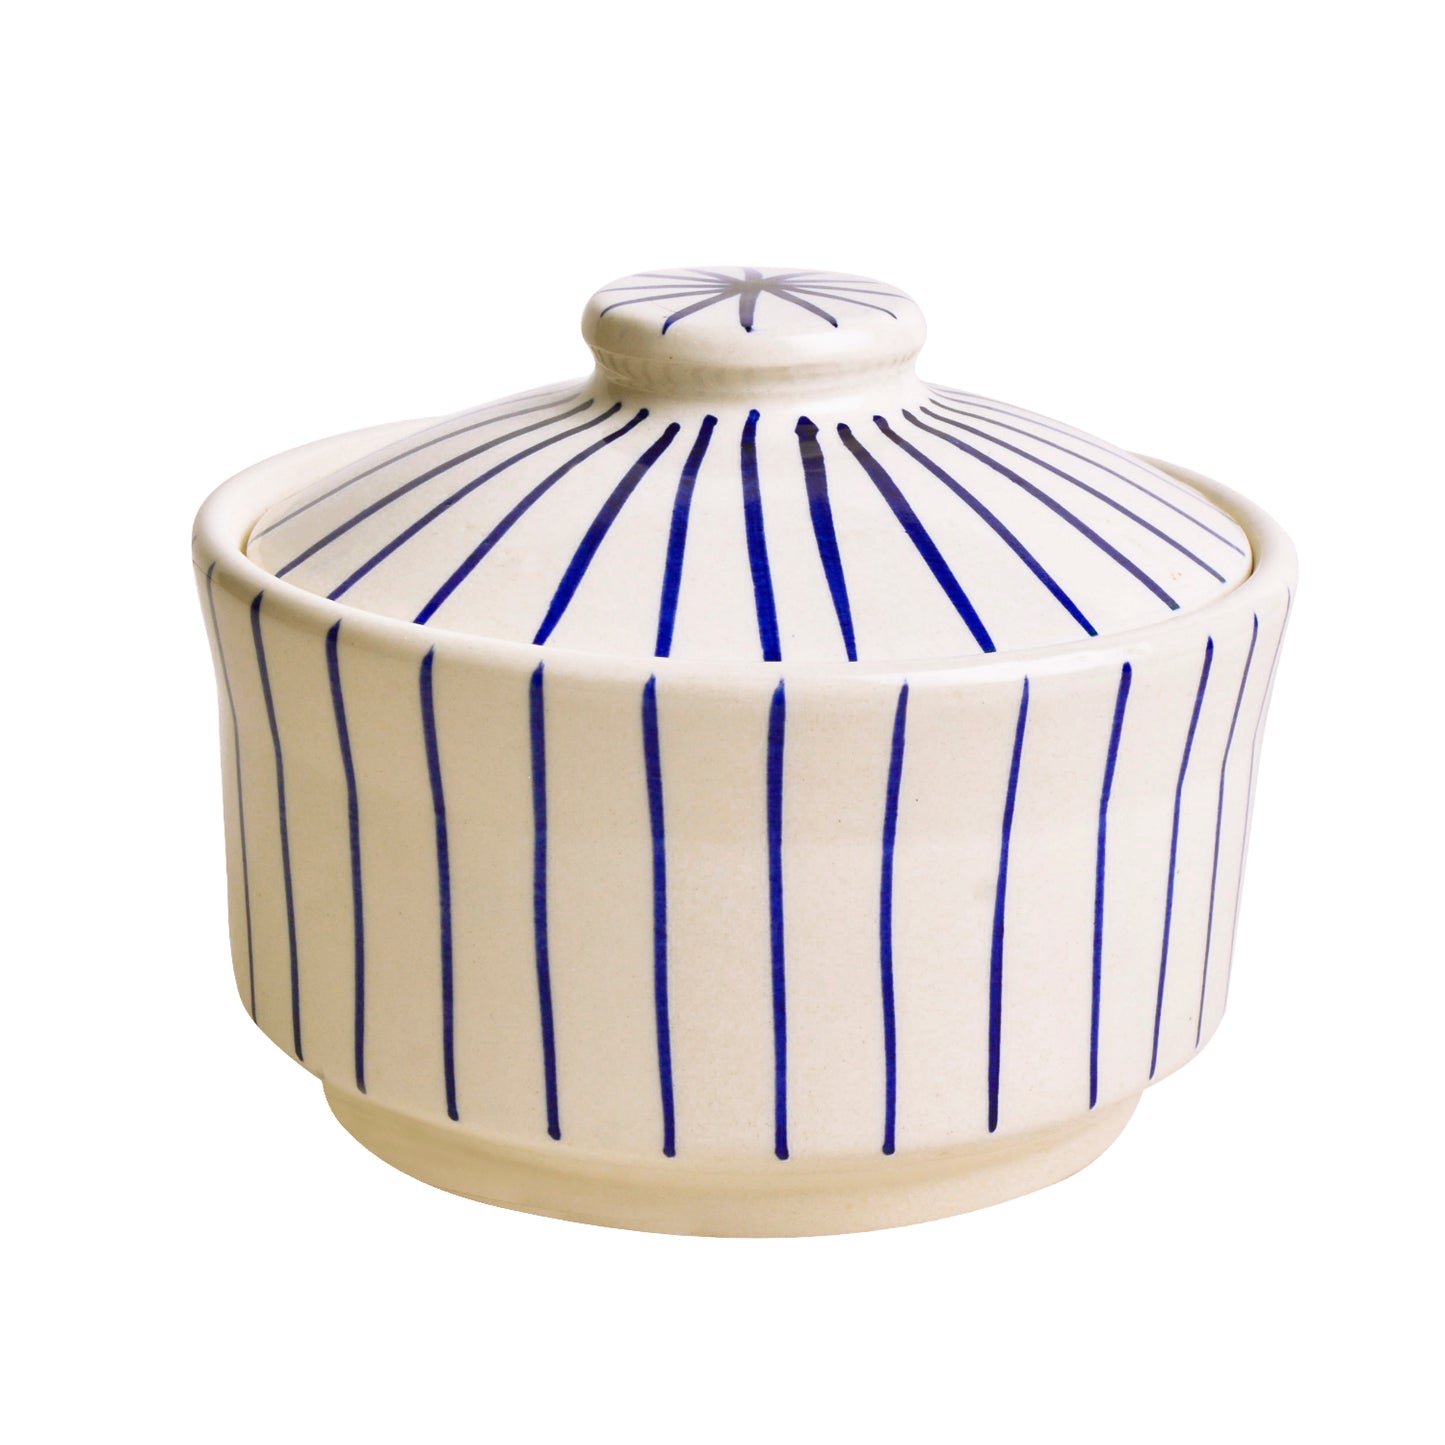 “Blue Kasa Line” Ceramic Striped Serving Donga with Lid (1000 ml, White and Blue )